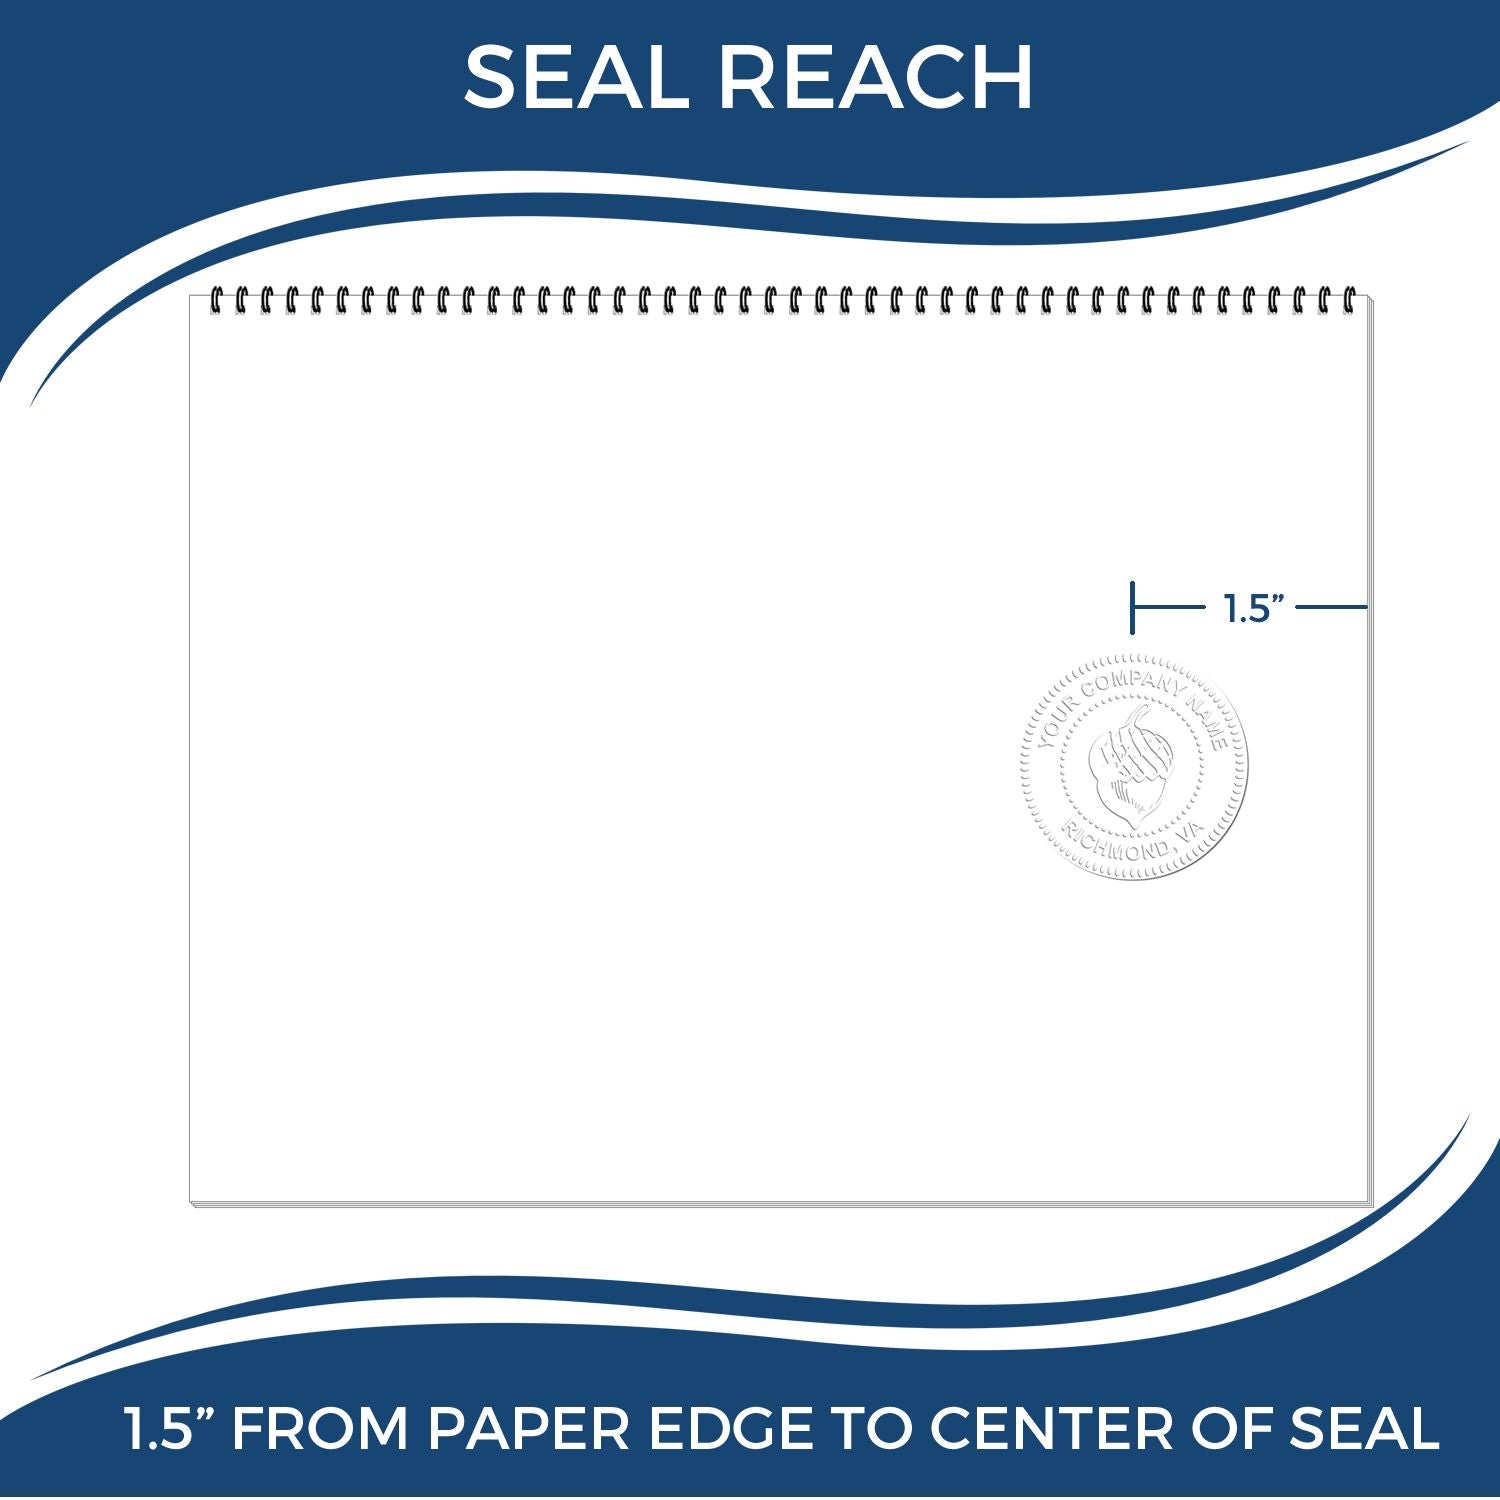 An infographic showing the seal reach which is represented by a ruler and a miniature seal image of the Colorado Engineer Desk Seal